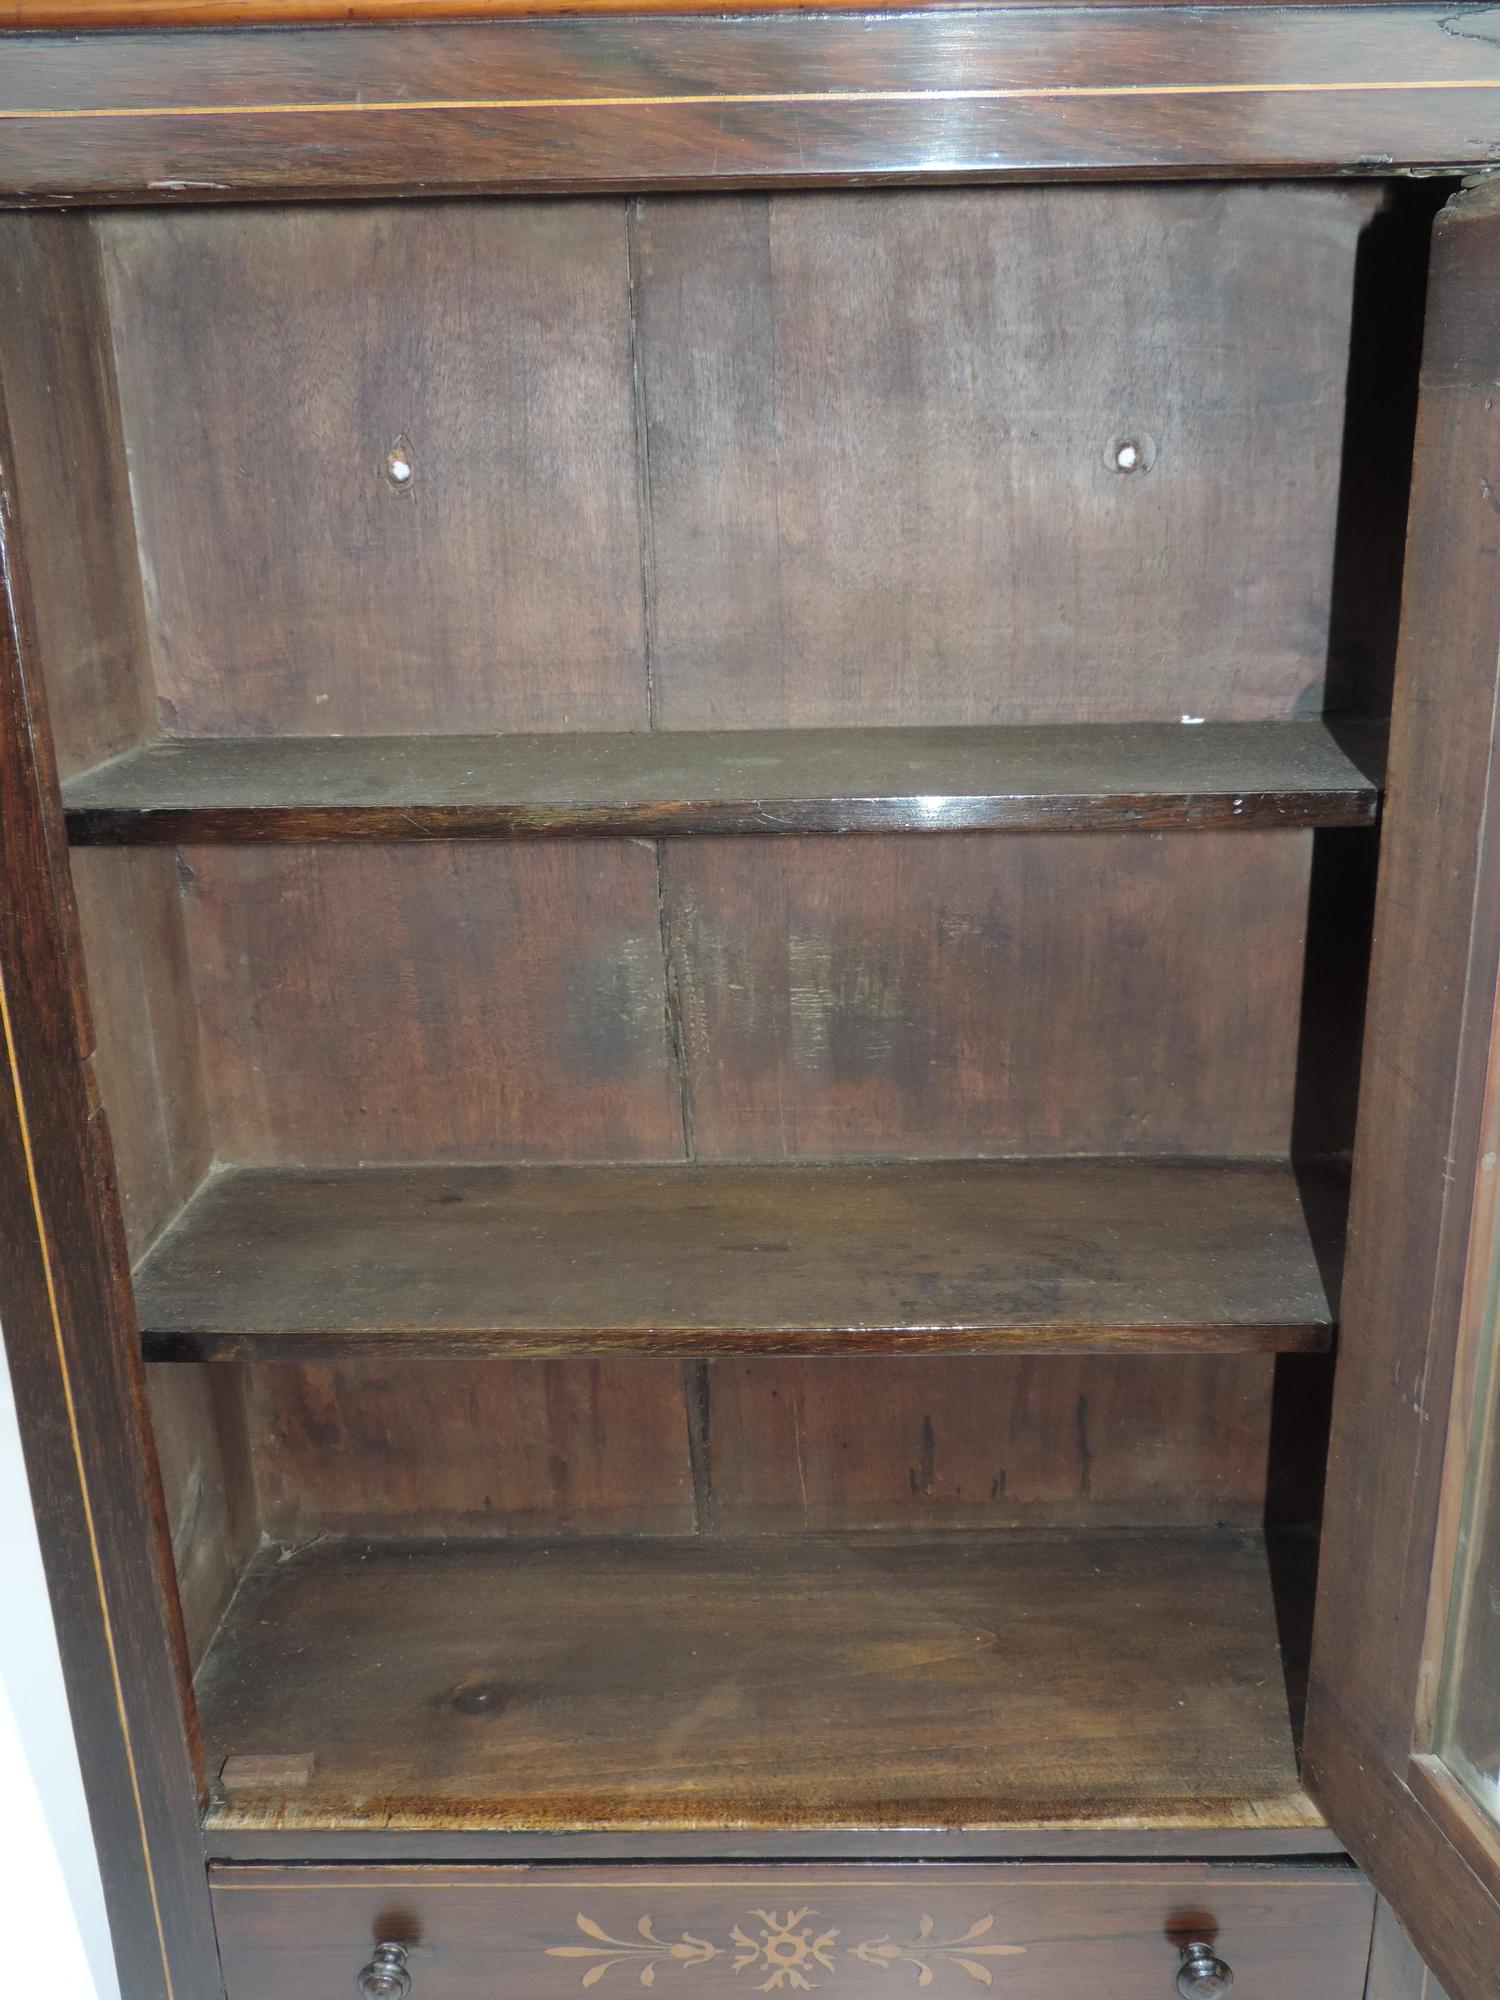 Small Victorian Rosewood Pier Cabinet with Drawer Under - Image 5 of 6